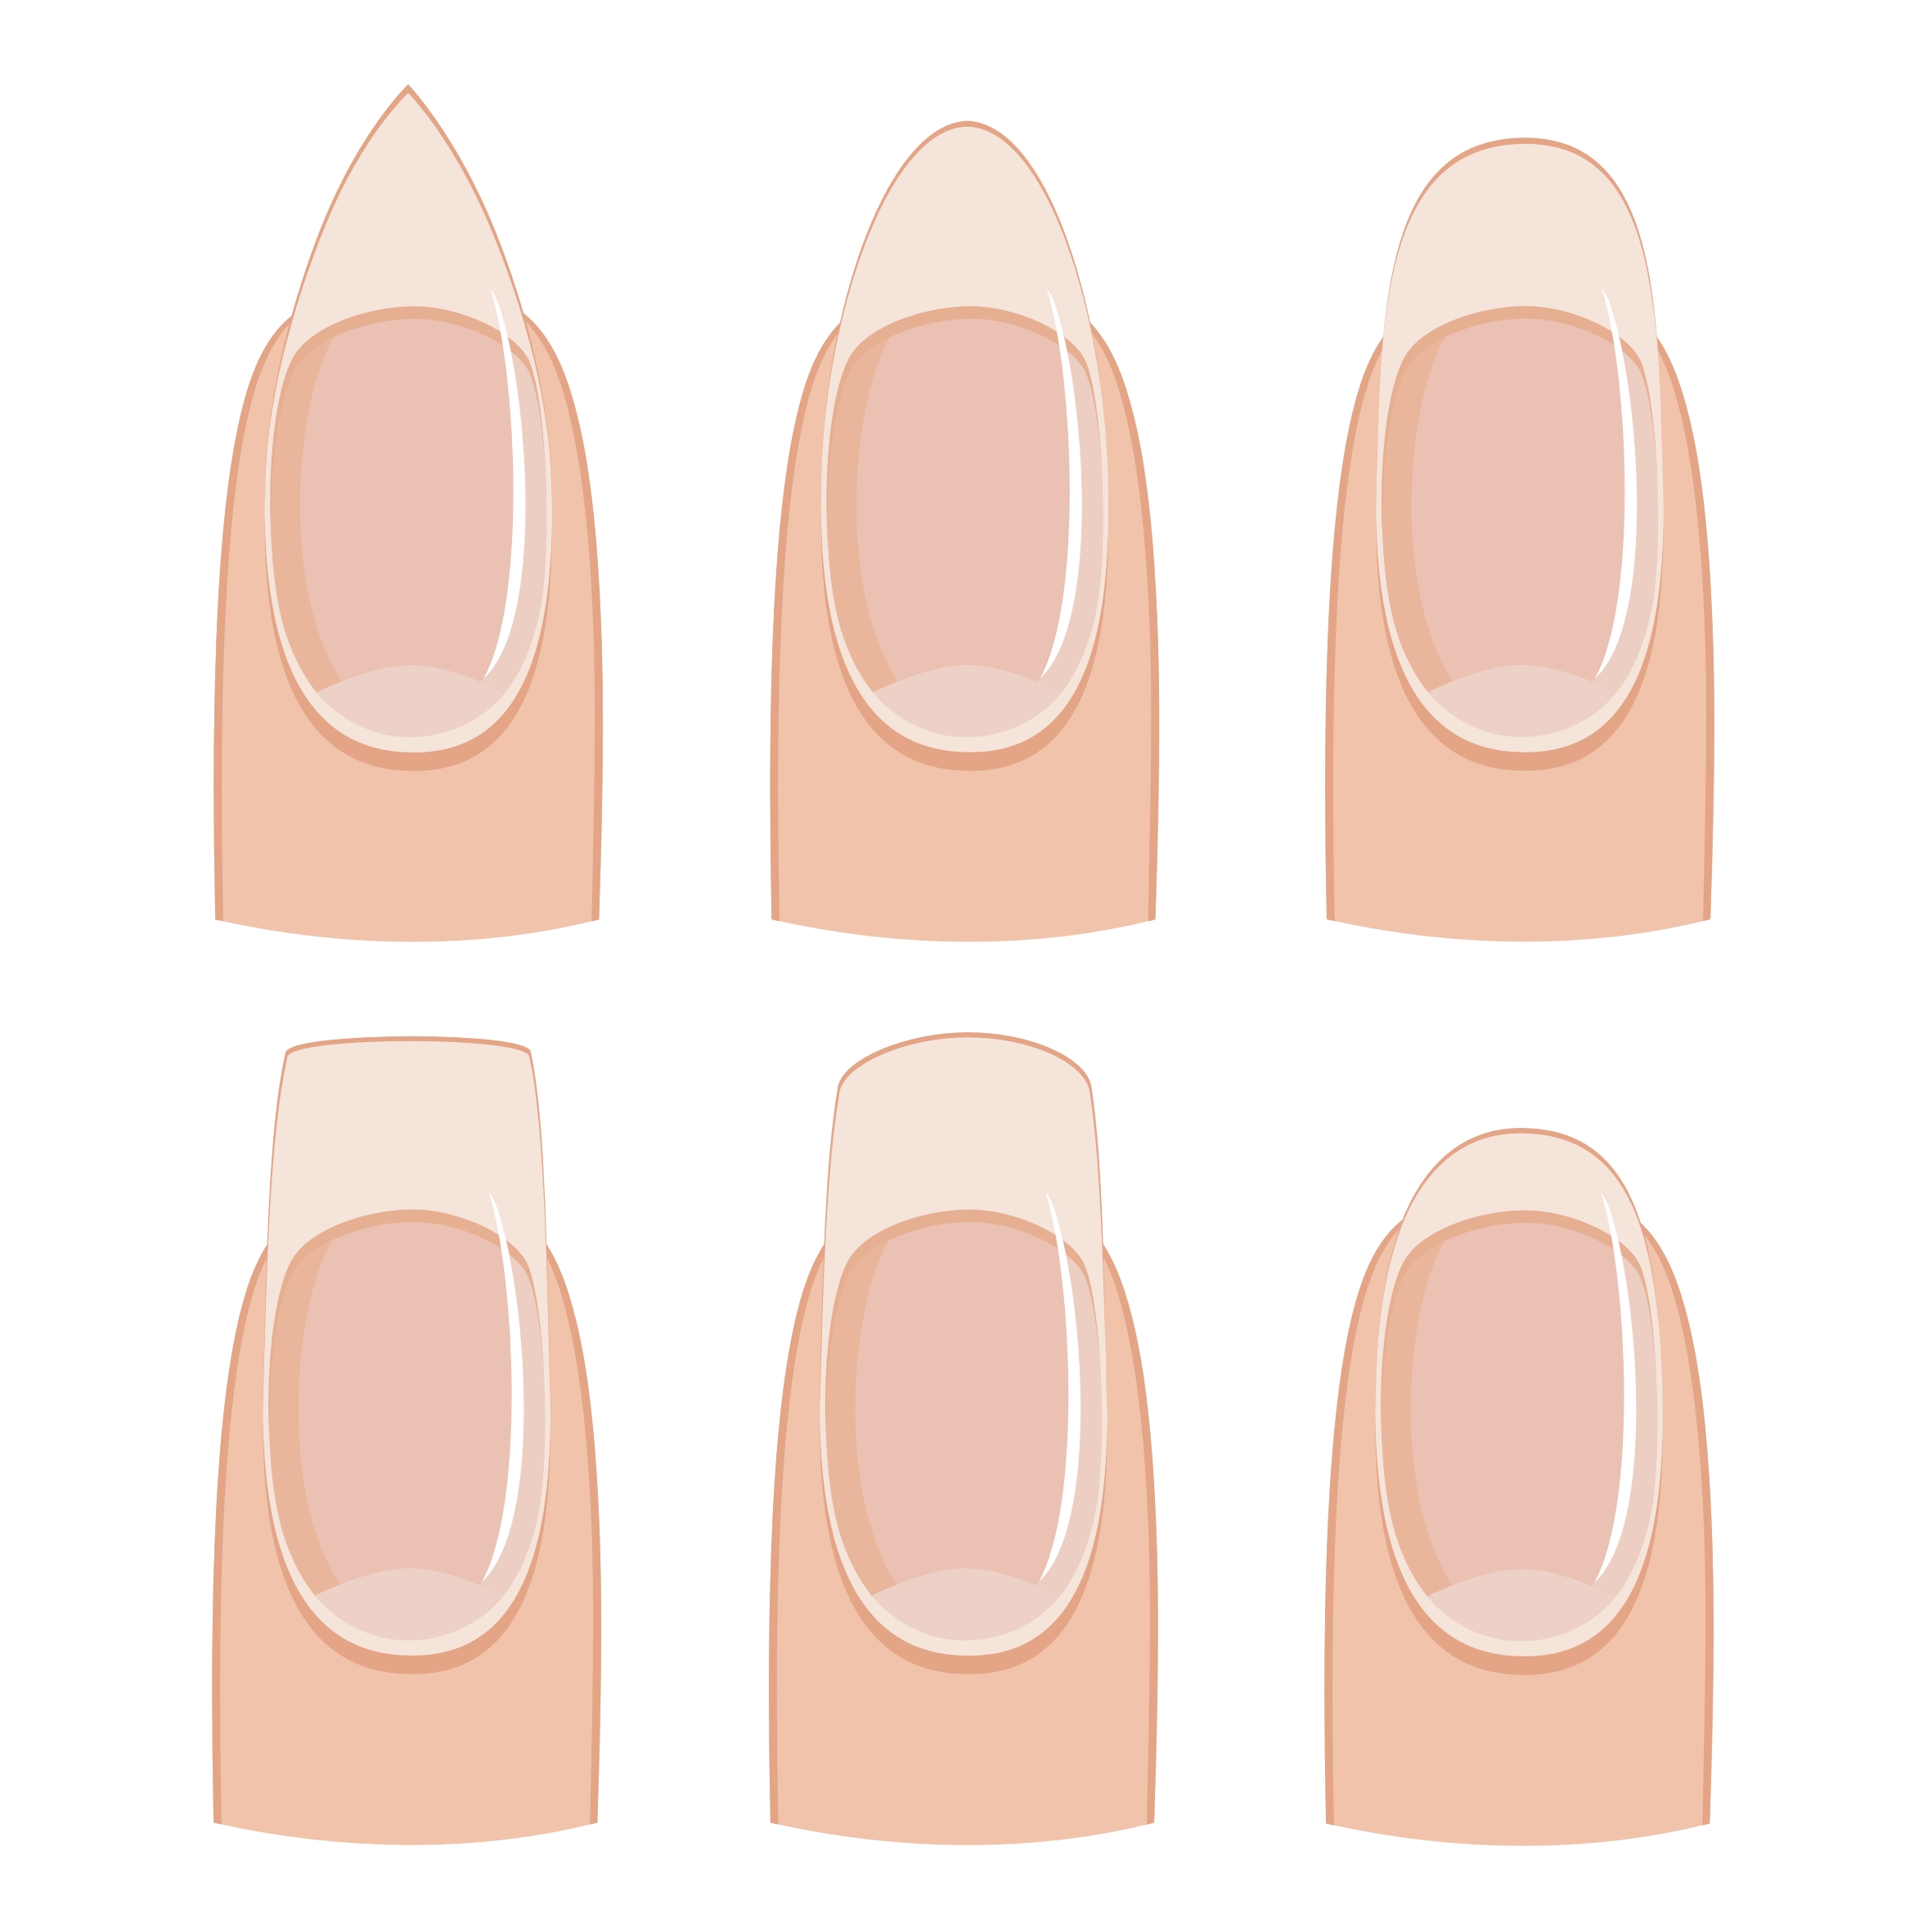 Which nail shape suits my hands best? Round or square? : r/RedditLaqueristas